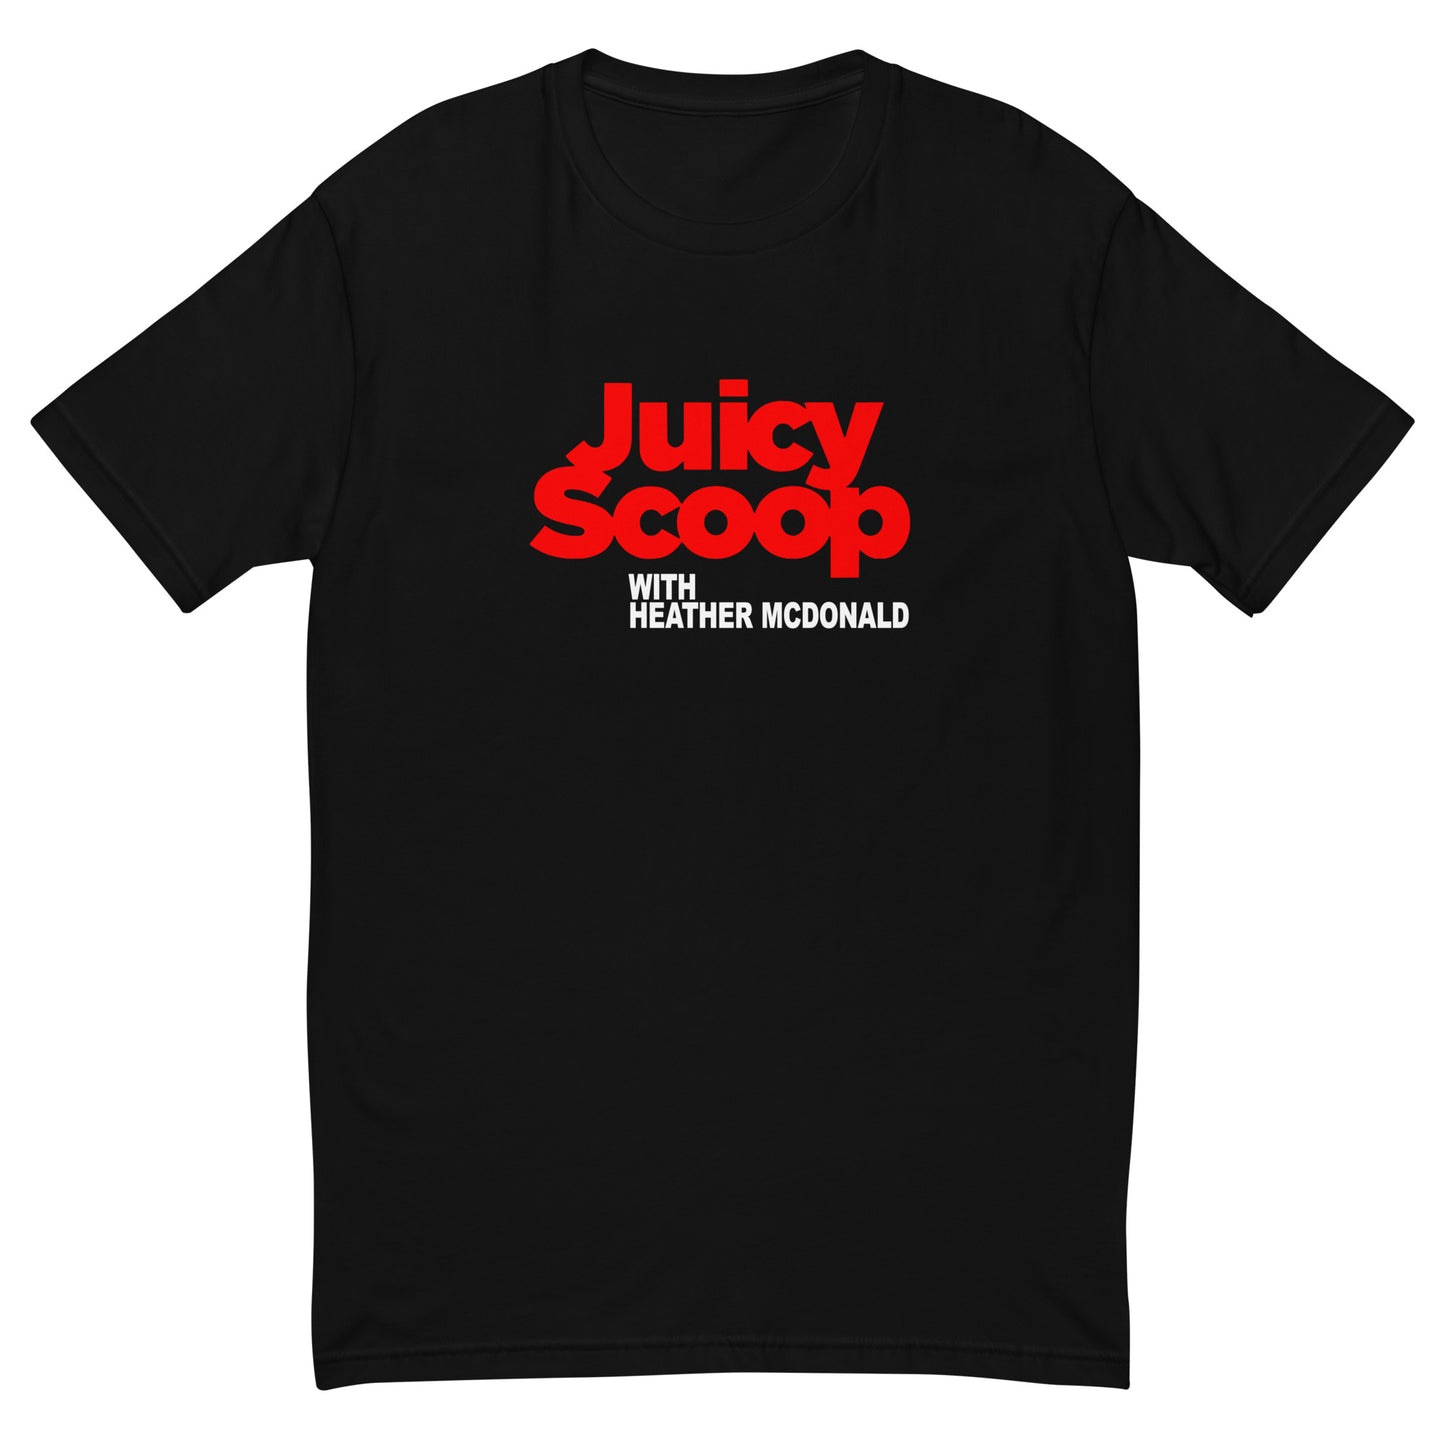 Juicy Scoop with Heather McDonald Fitted Men's Short Sleeve T-shirt